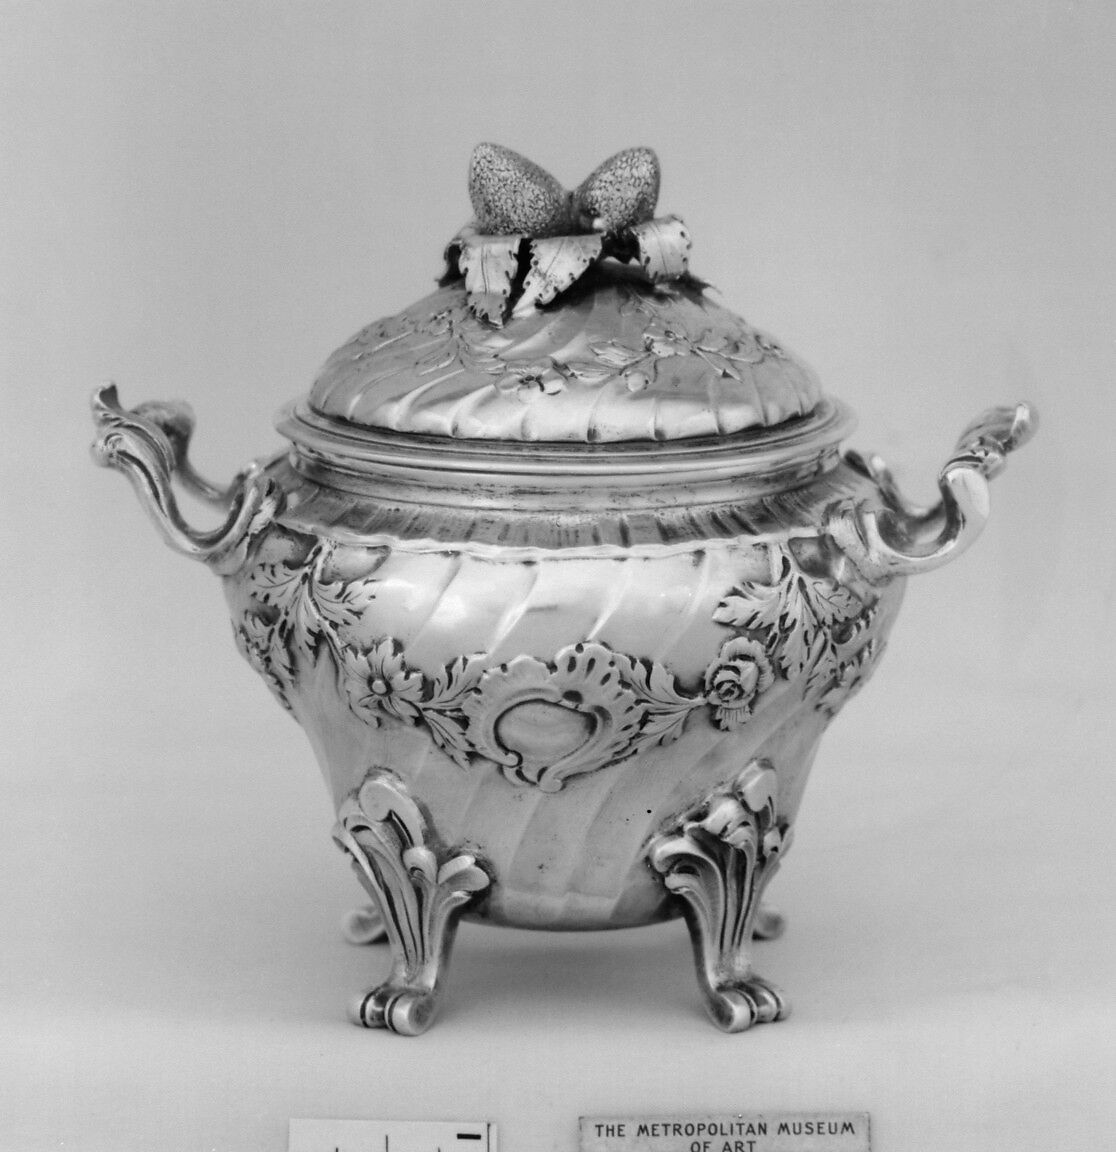 Sugar bowl in 18th century style, Silver, French, Paris 